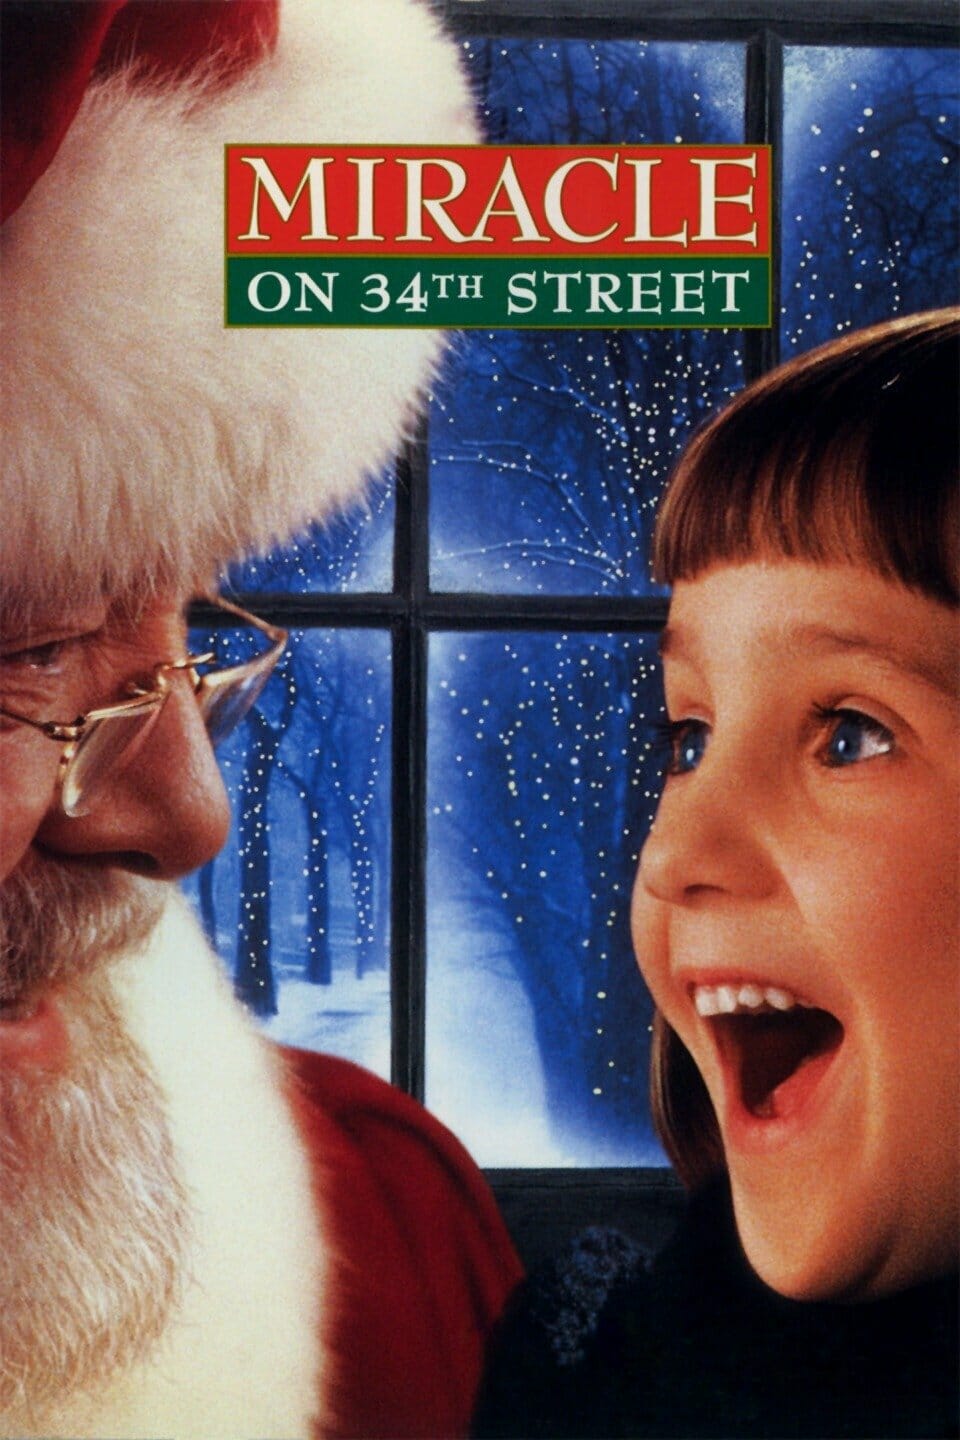 Movie poster from the film Miracle on 34th Street. 